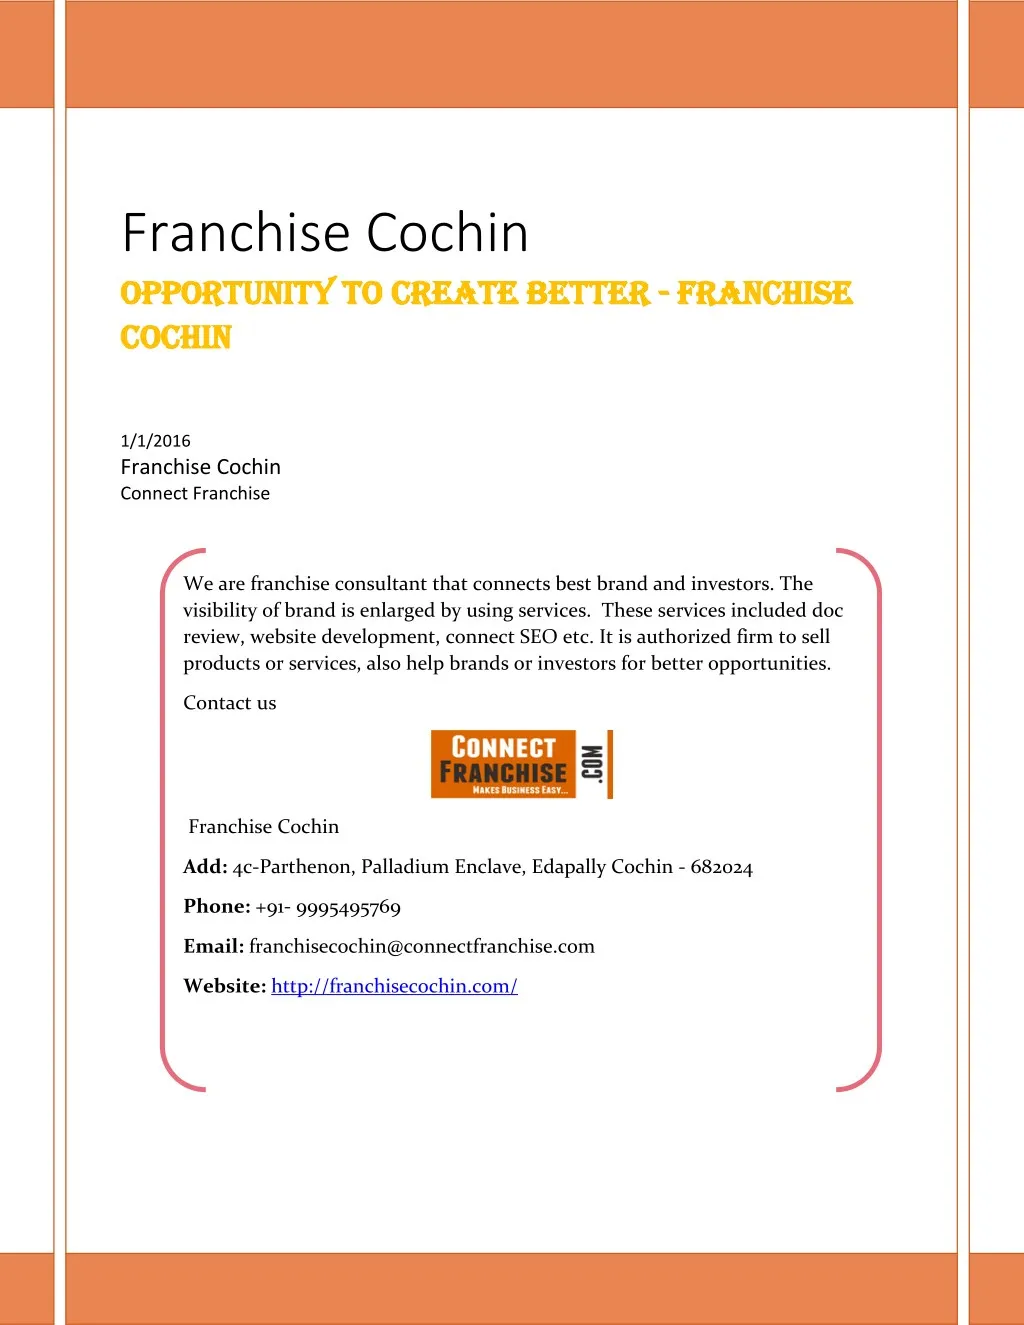 franchise cochin opportunity to create better